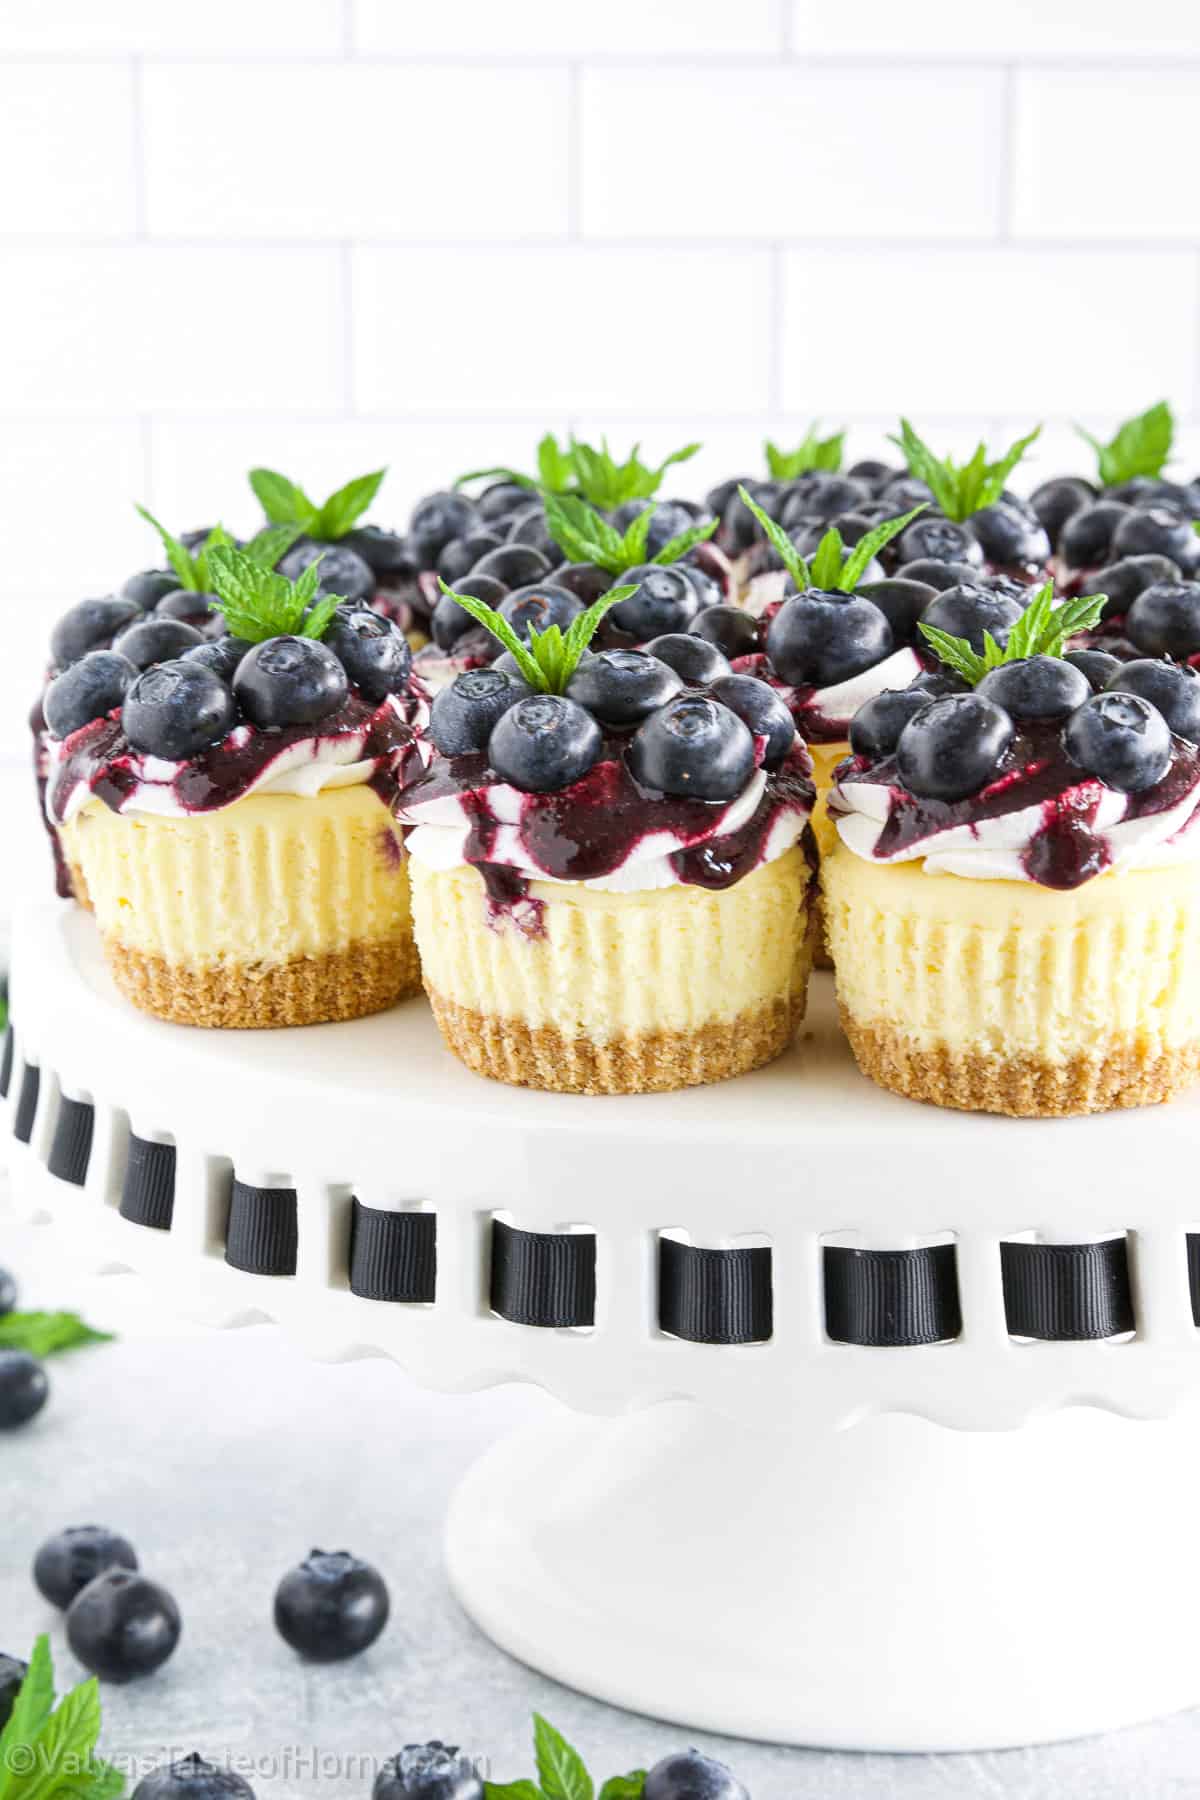 Blueberry cheesecake is a favorite treat among those who prefer the acidic creaminess of the cheesecake combined with the natural sweetness of blueberries.